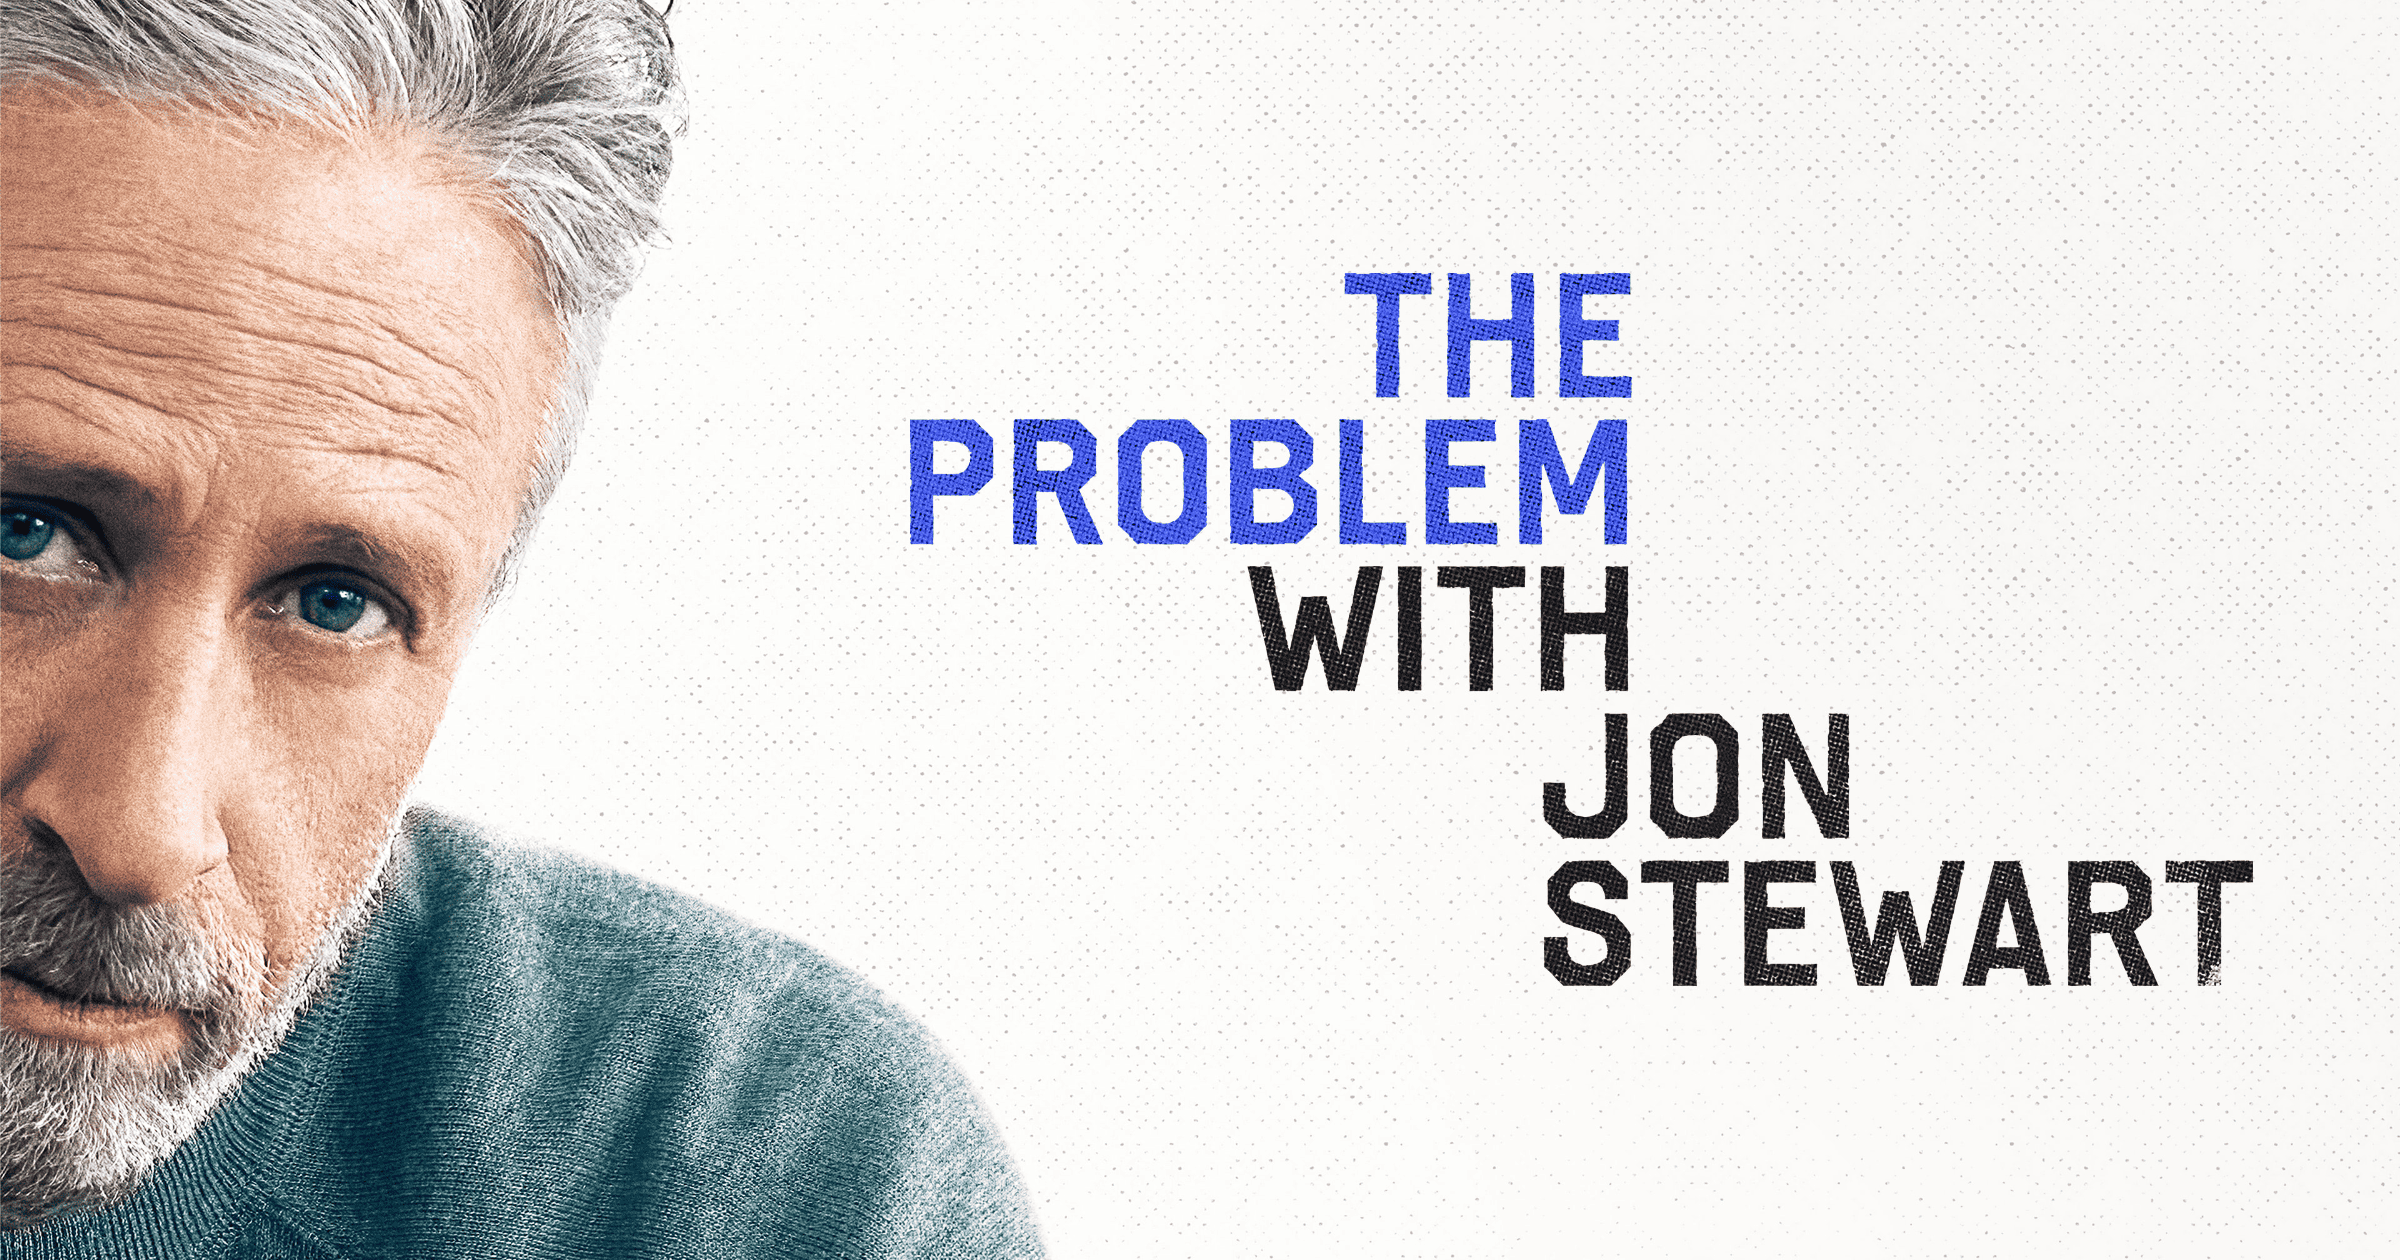 ‘The Problem With Jon Stewart’ Launching September 30 on Apple TV+